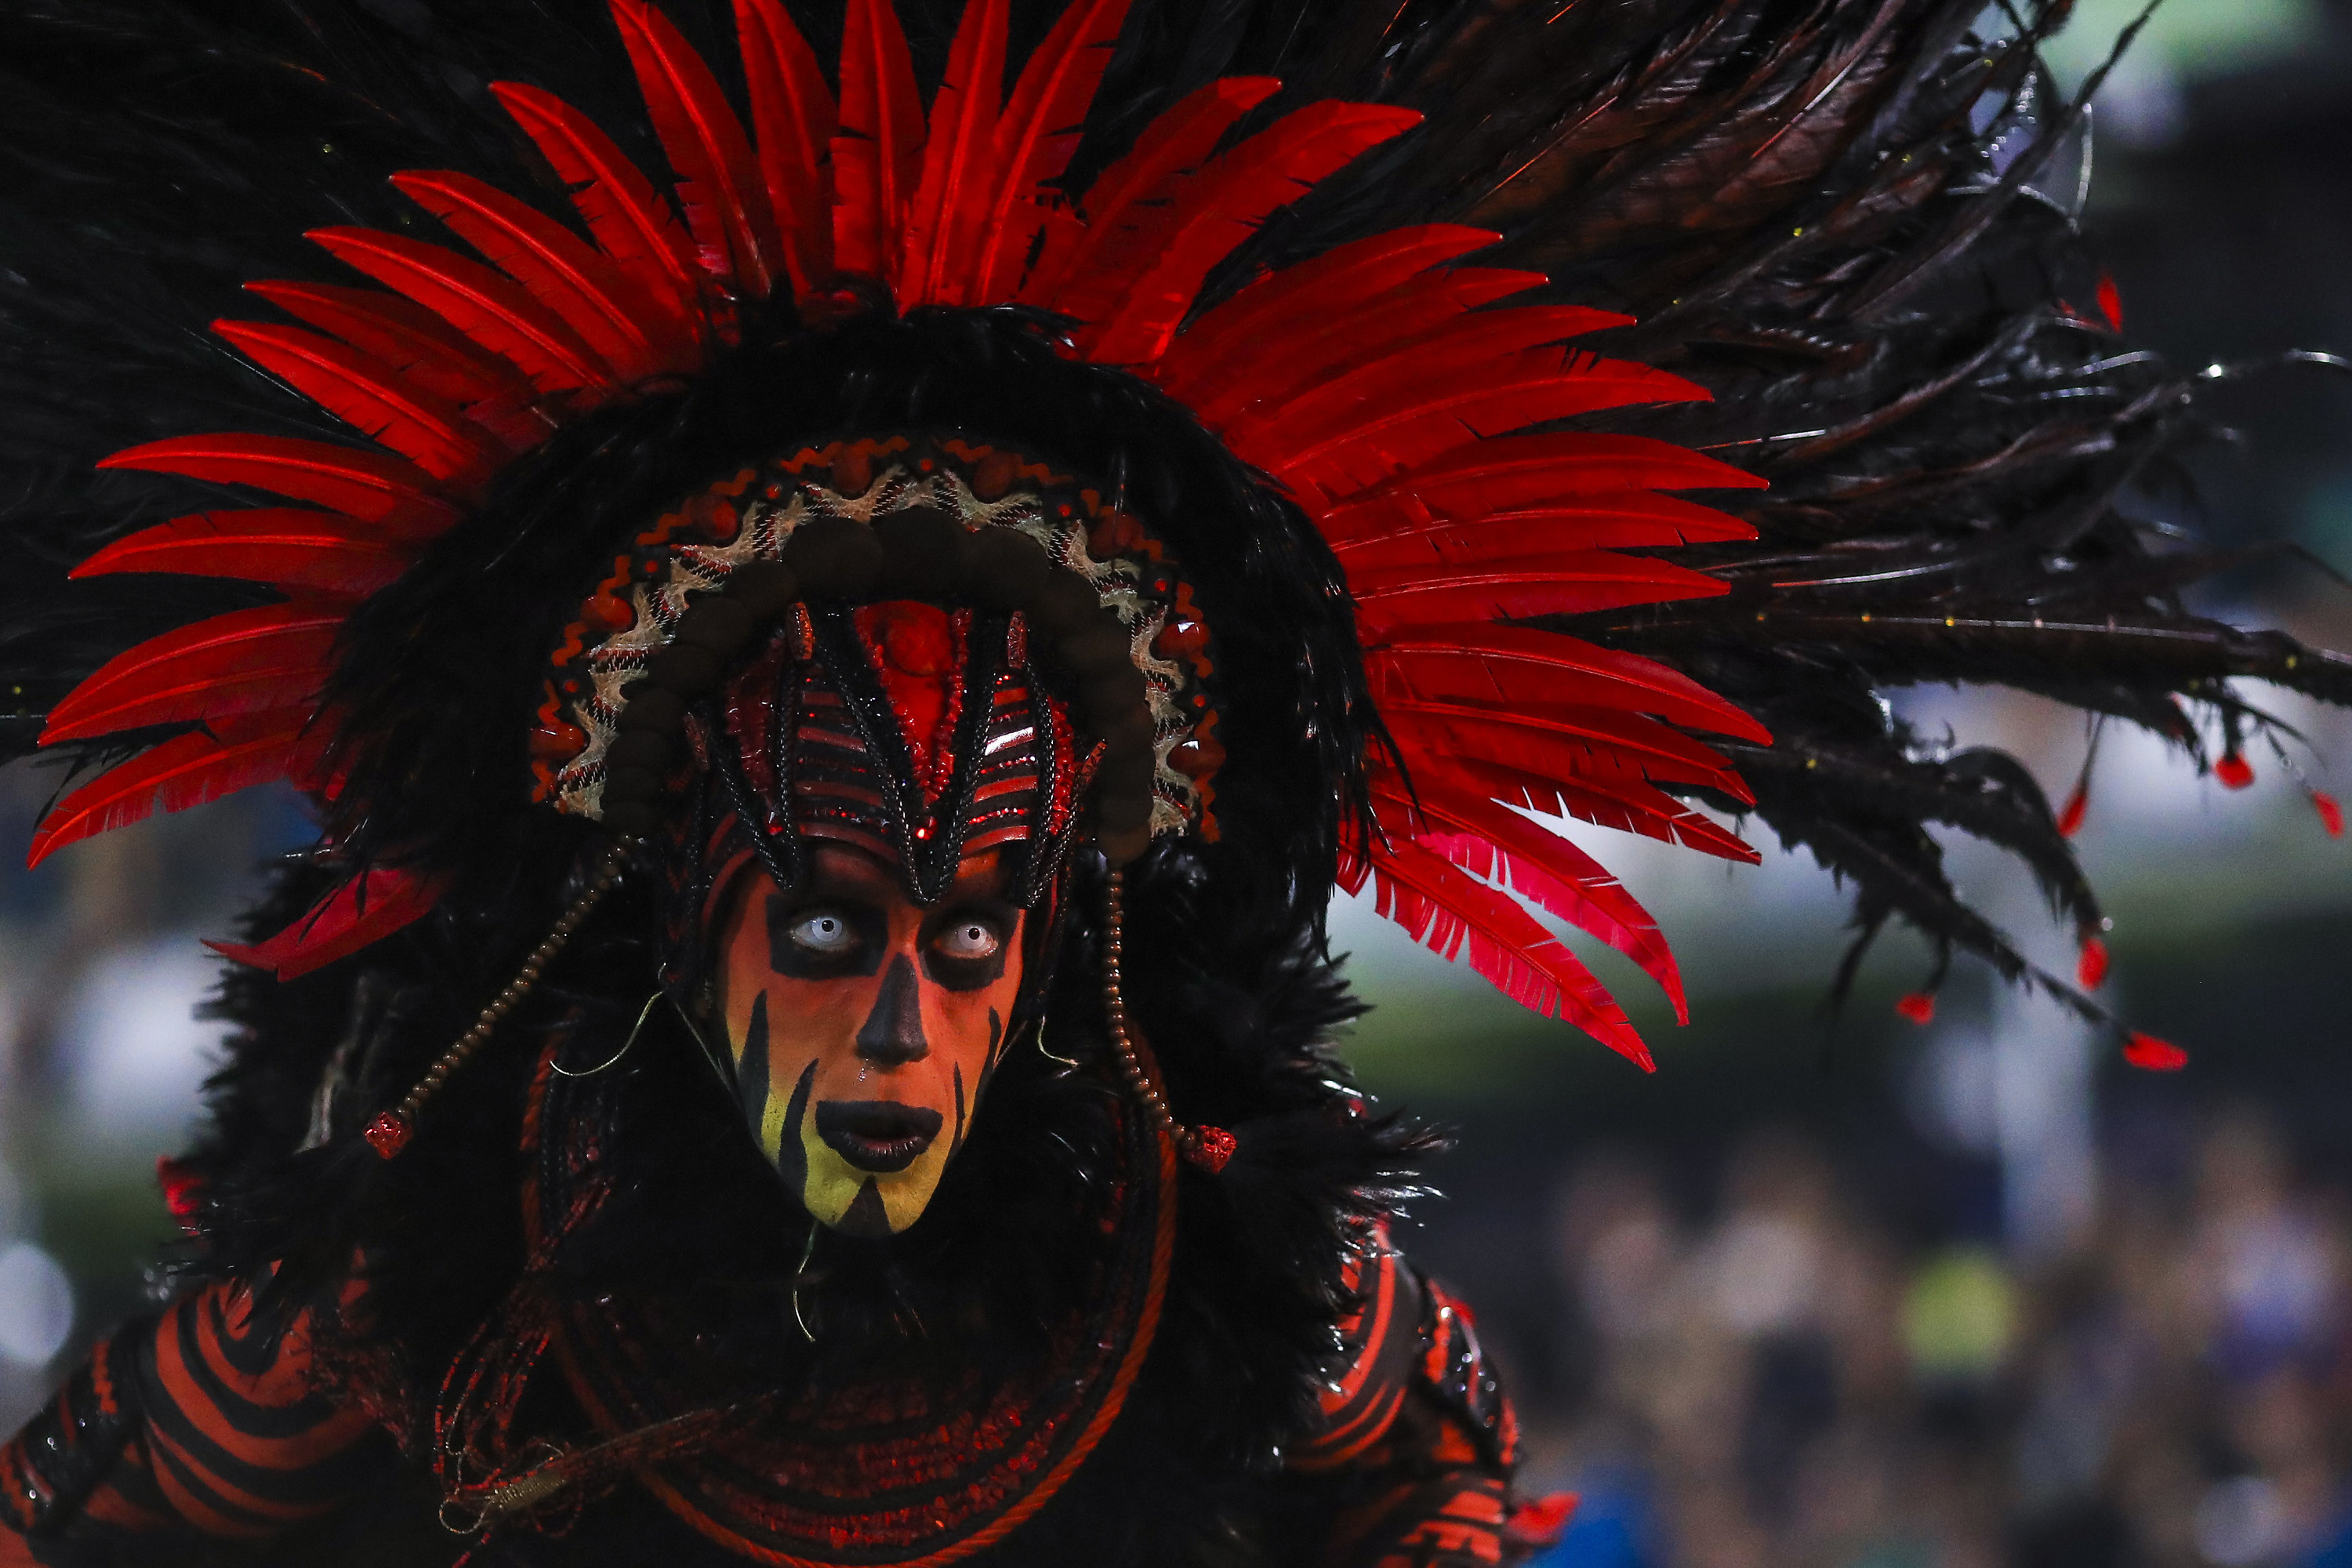 A person wearing face paint, bright contact lenses, and a large feathered headdress